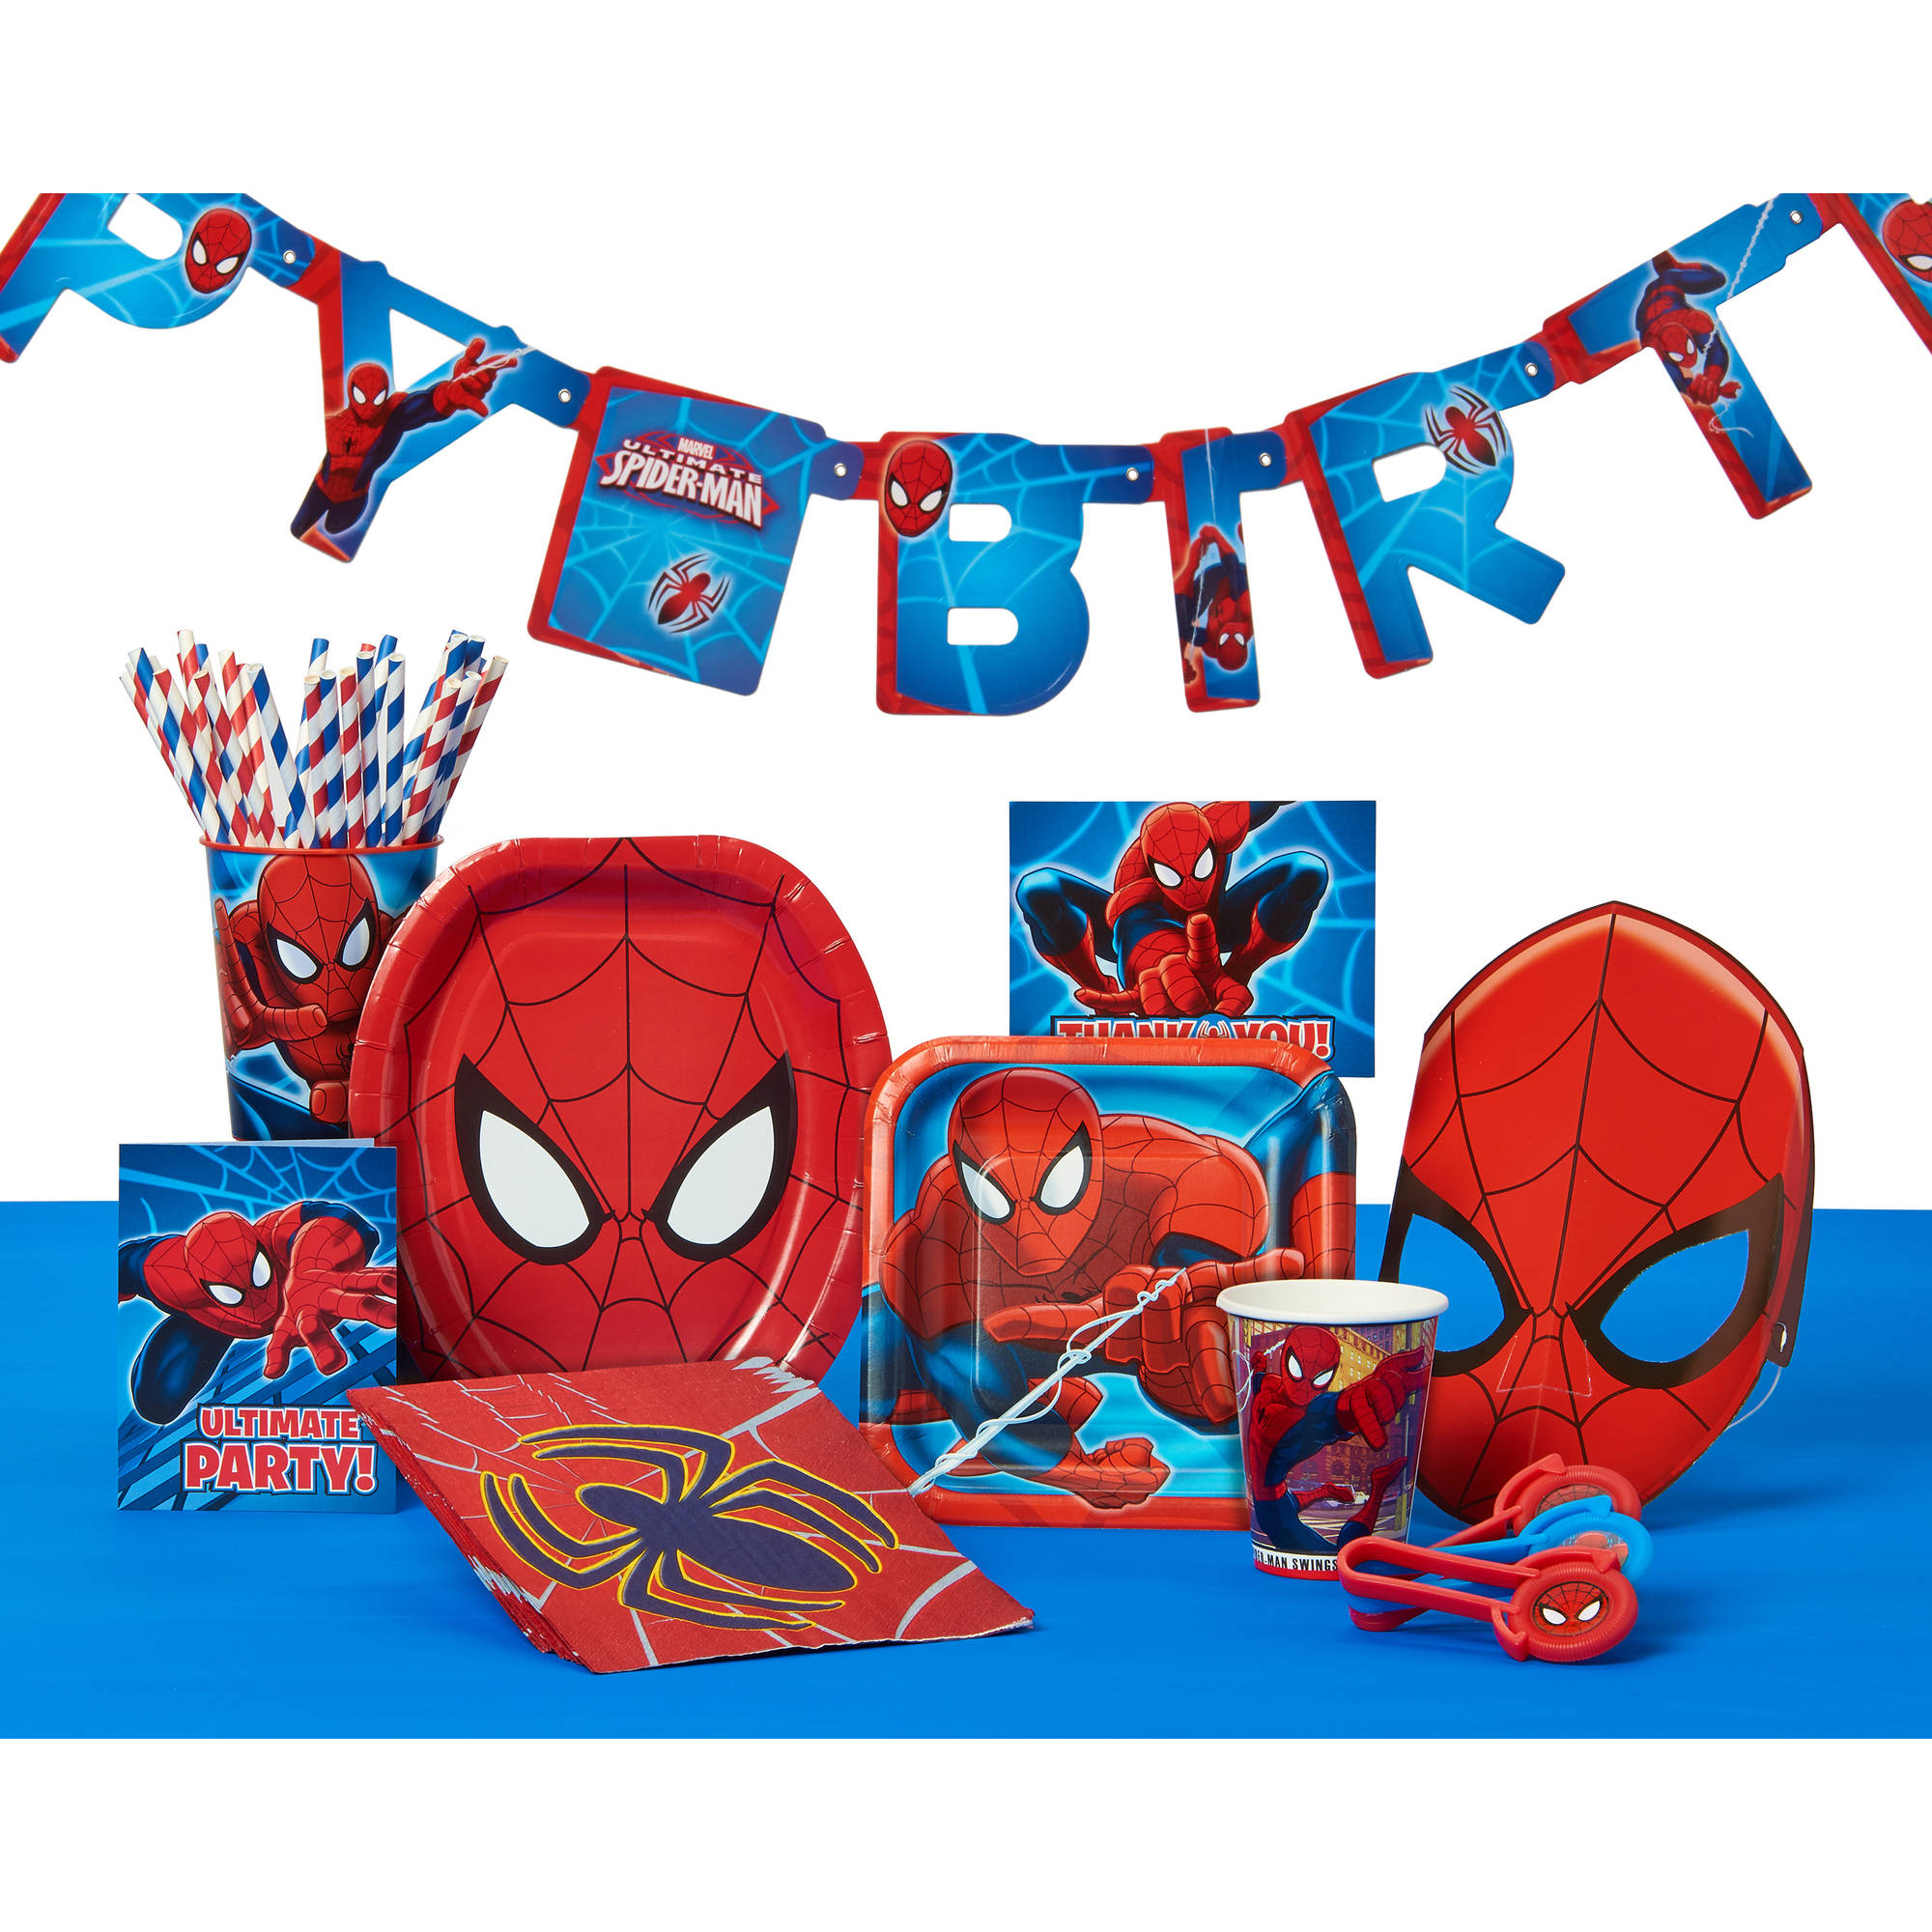 Marvel Spider-Man 7" Square Plates, 8 Count, Party Supplies - image 2 of 2